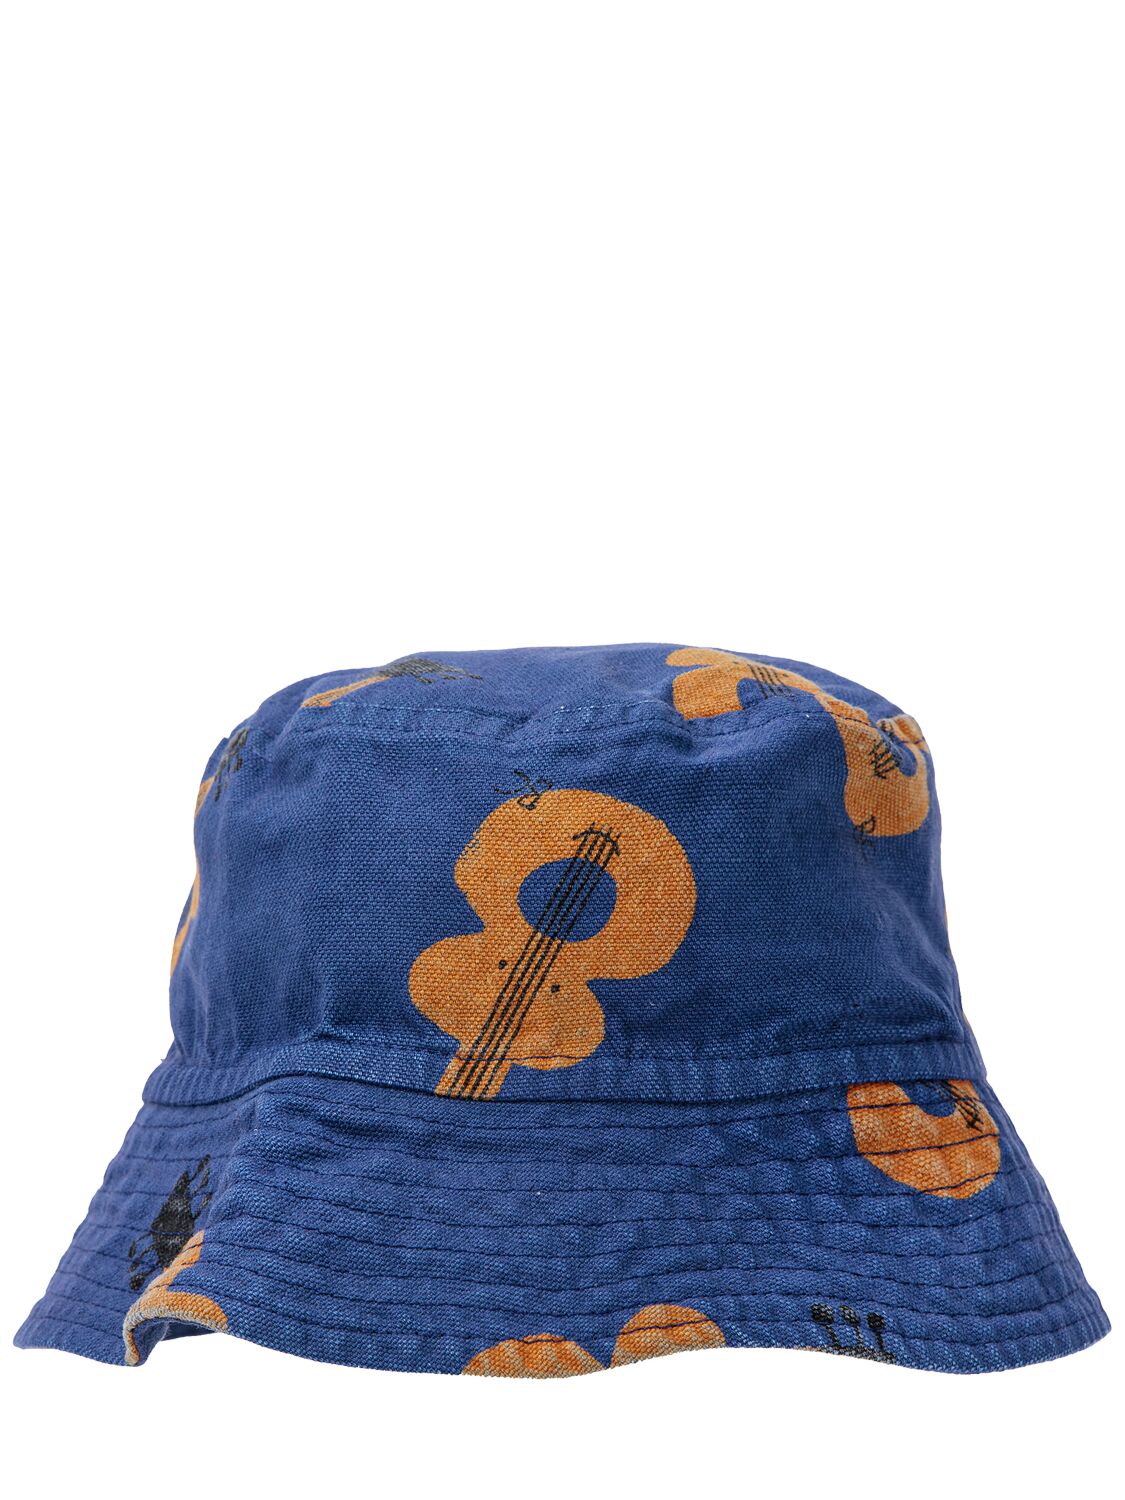 Bobo Choses Kids' Printed Cotton Bucket Hat In Blue